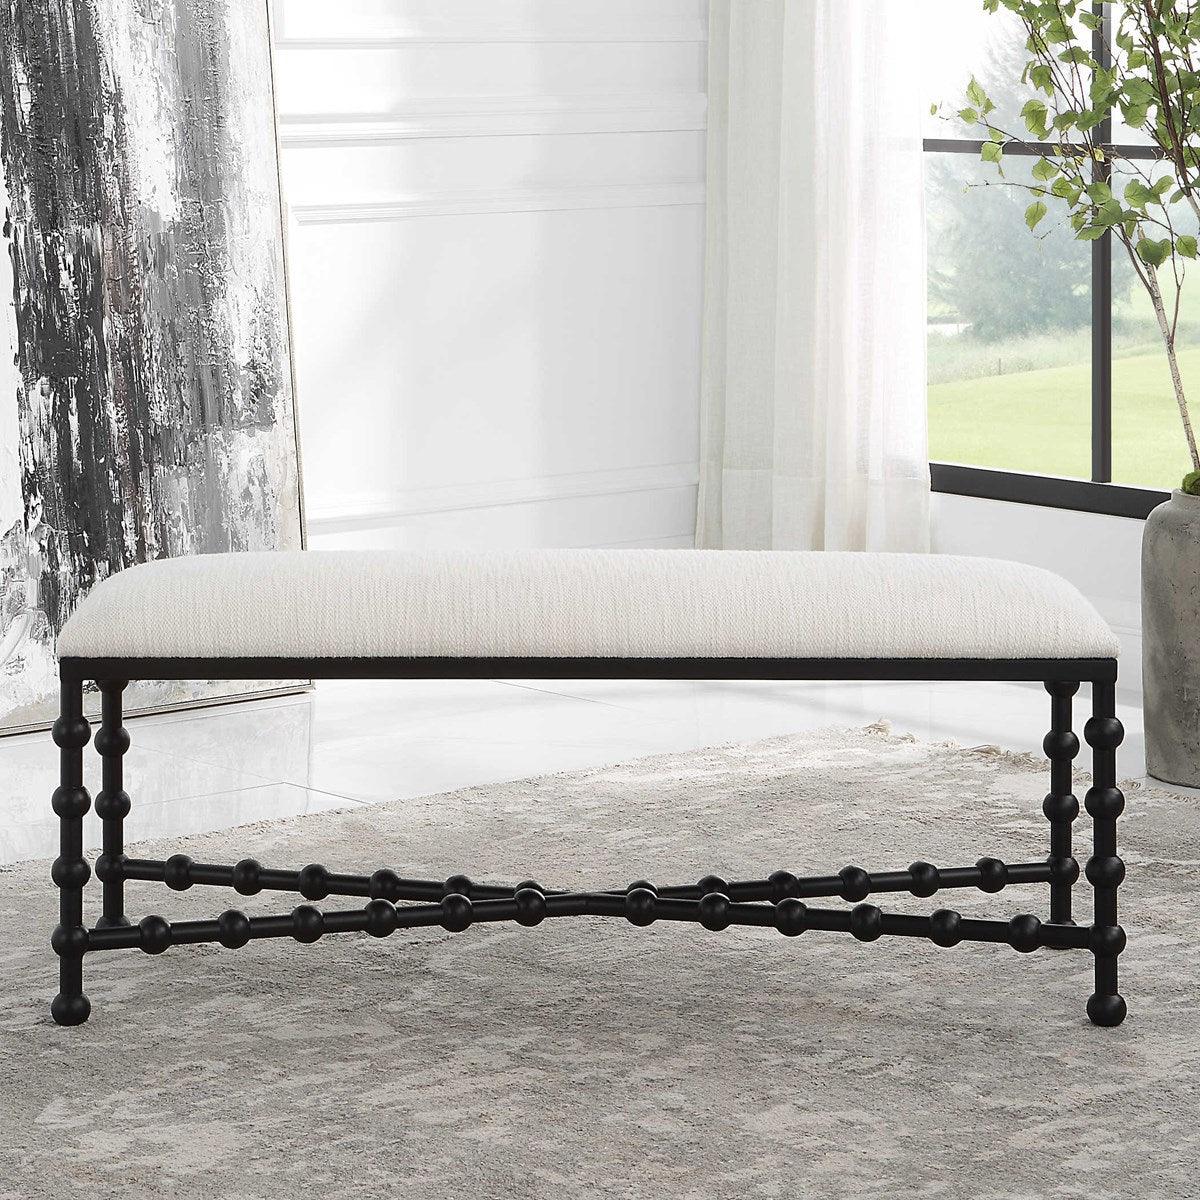 The Uttermost - Iron Drops Bench - 23756 | Montreal Lighting & Hardware